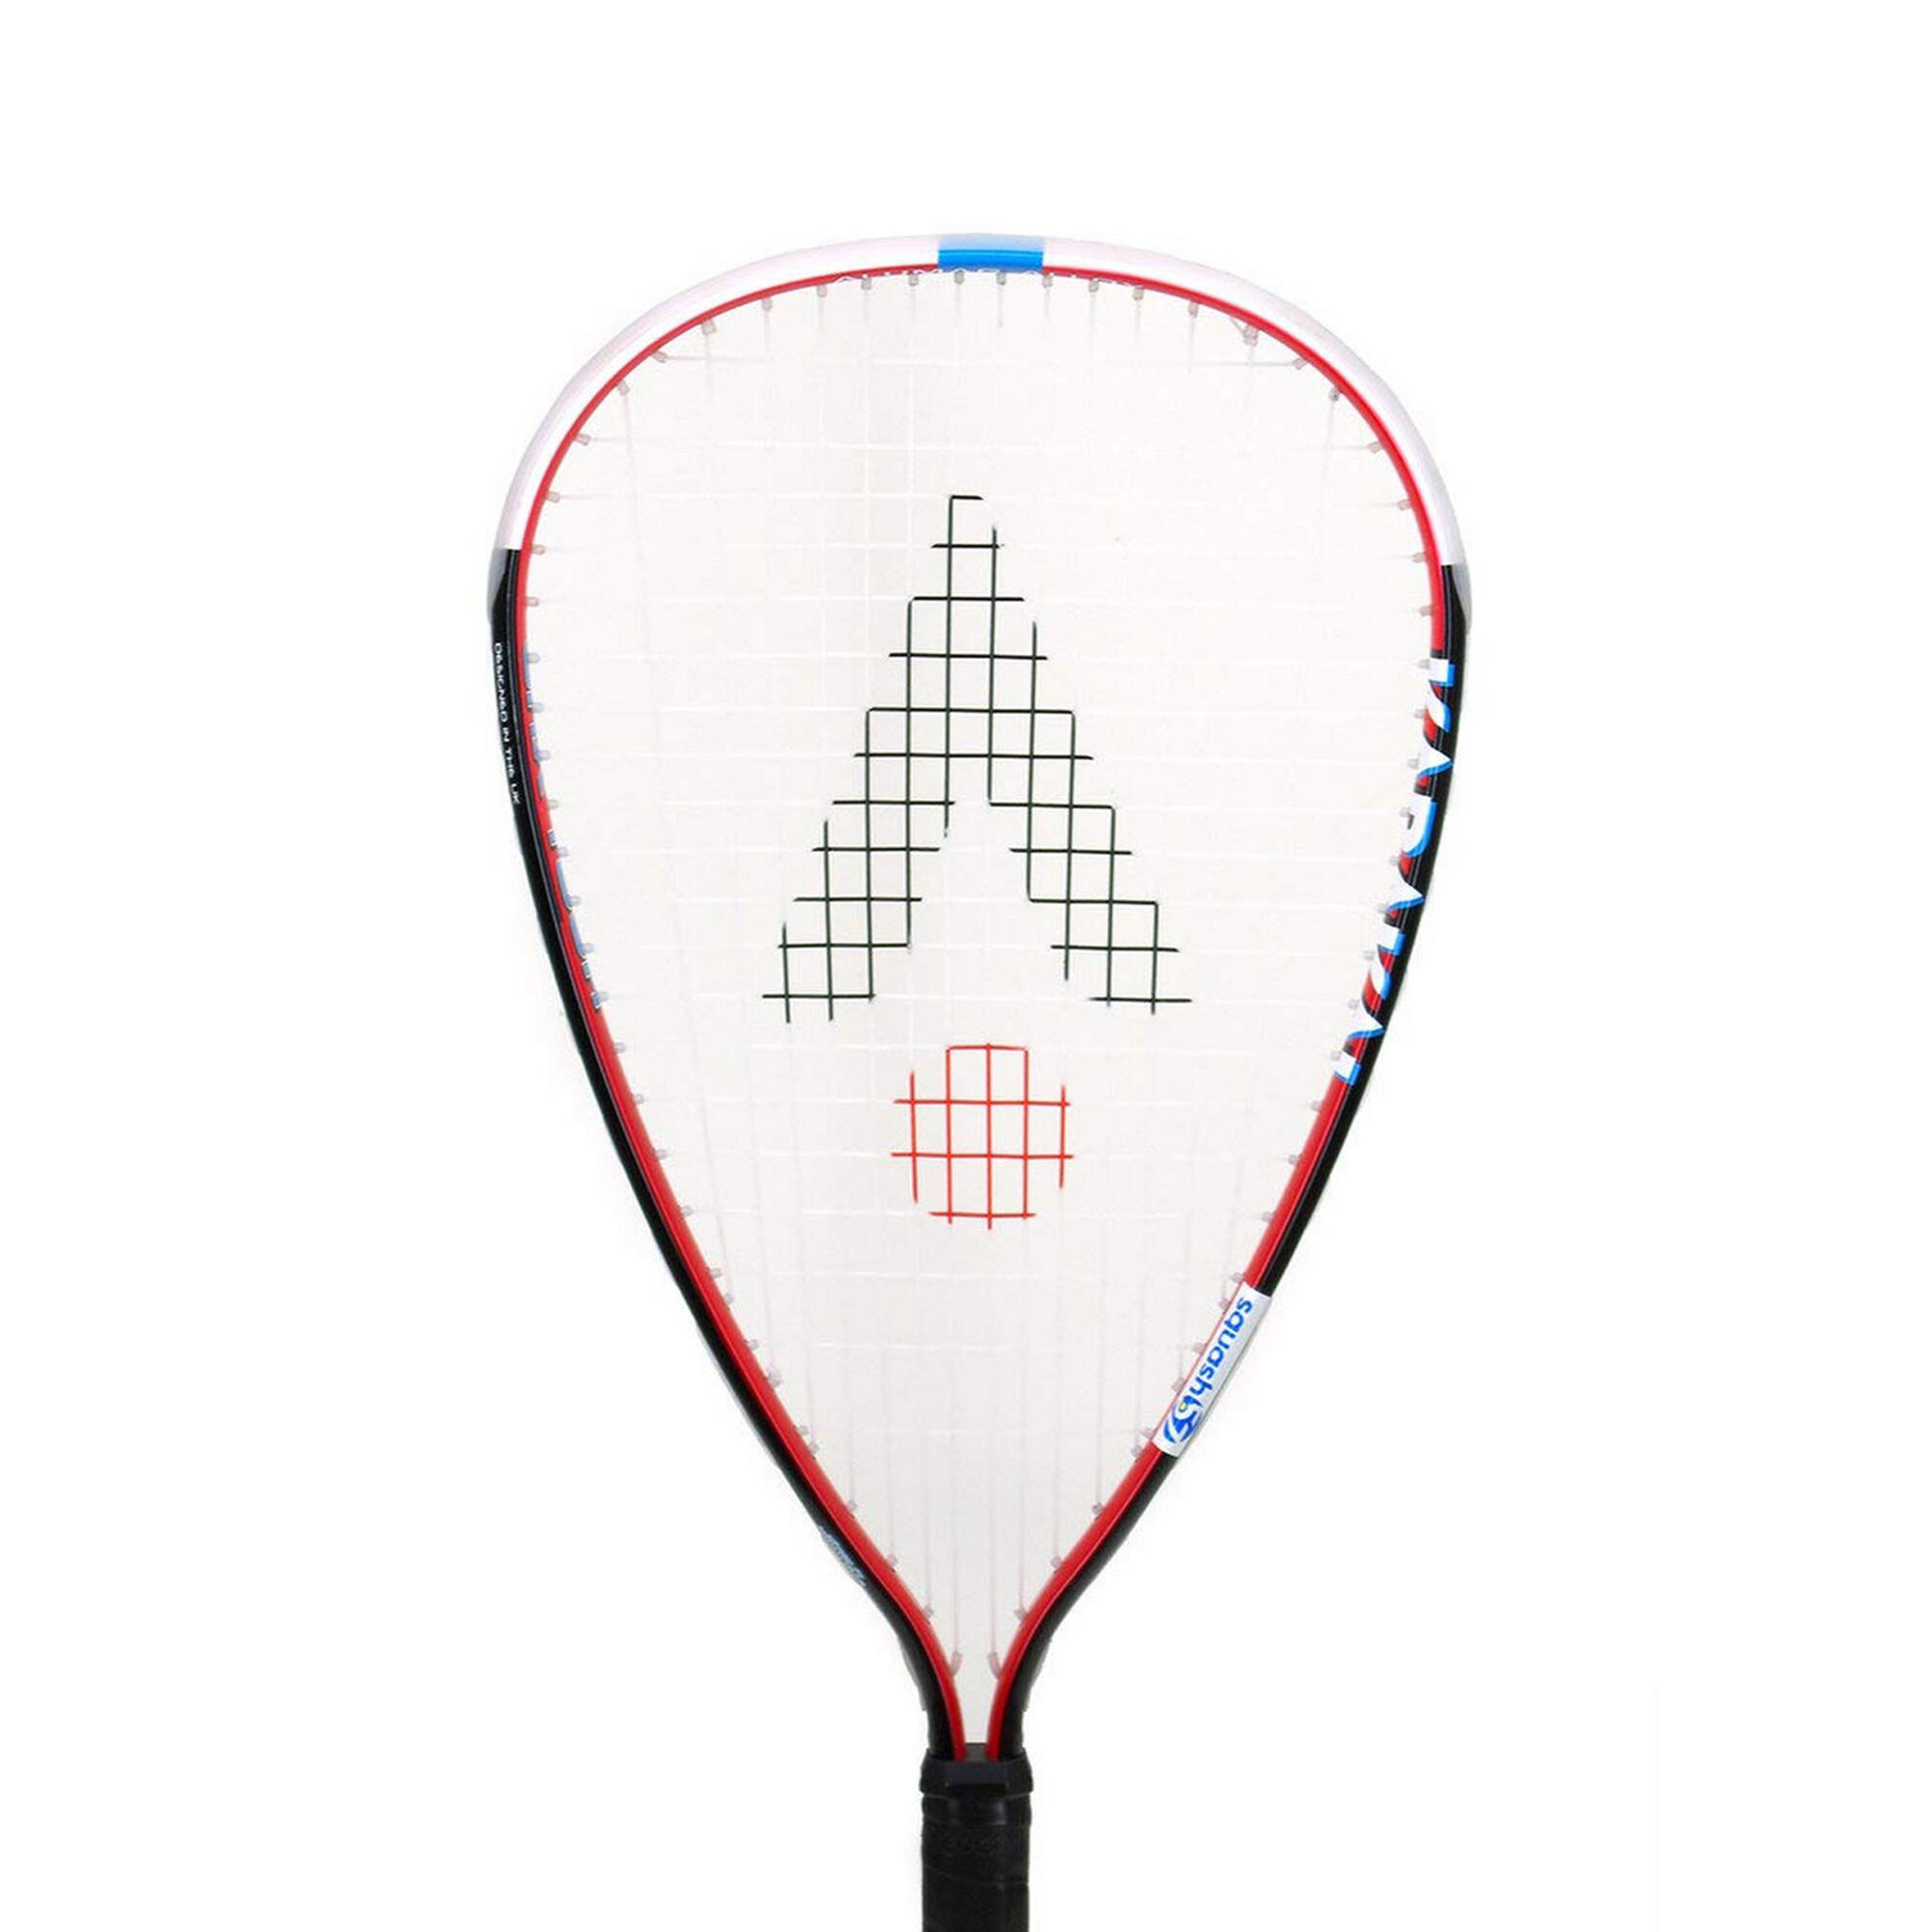 CRXTour Racquetball Racket (Black/White/Red) 3/3